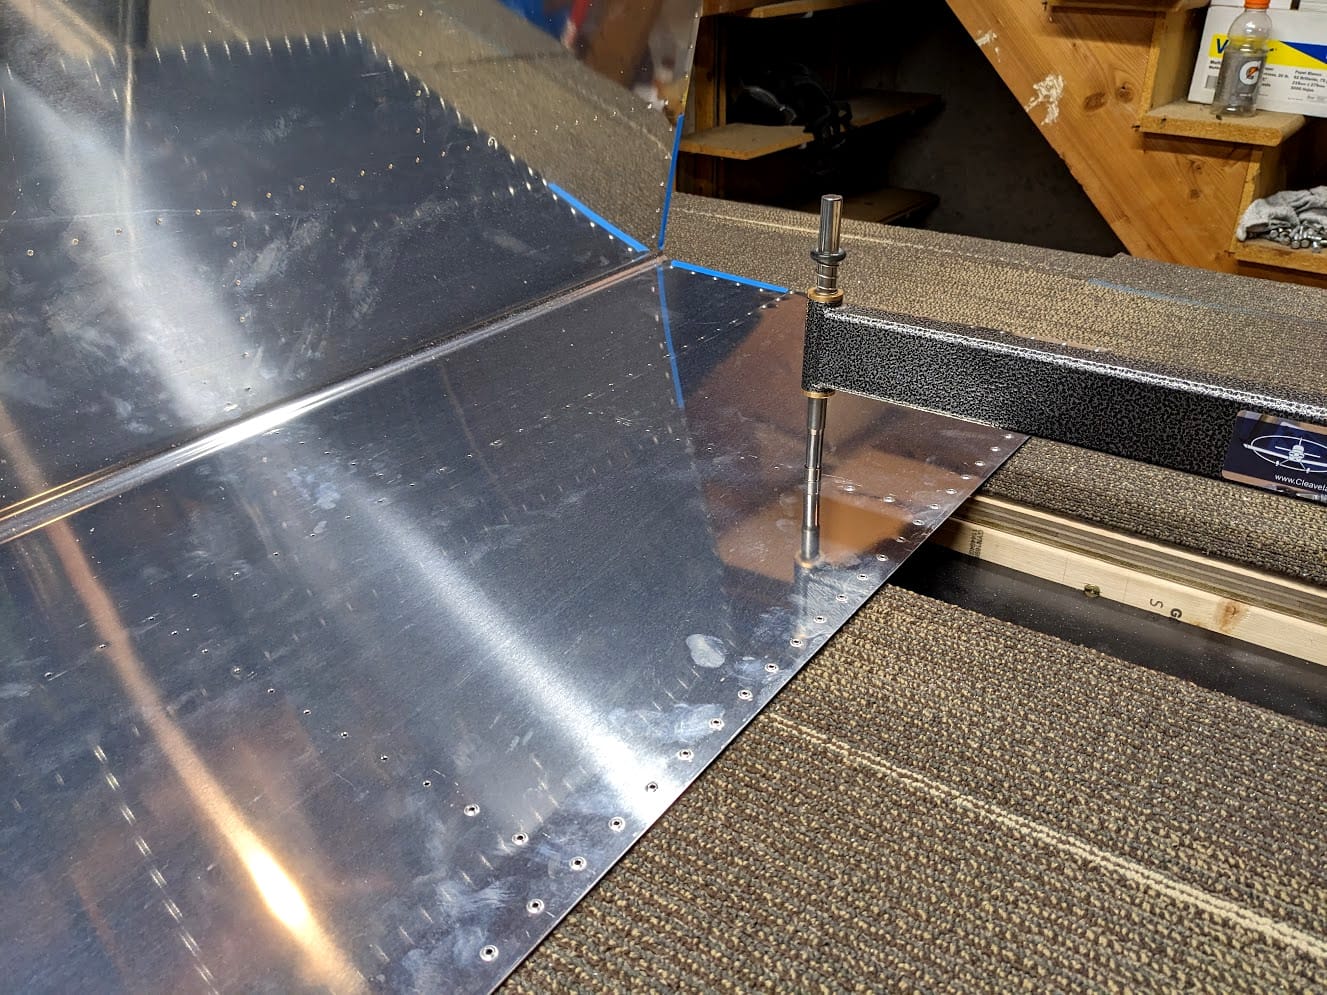 Riveting, Bankruptcy, and the Horizontal Stabilizer